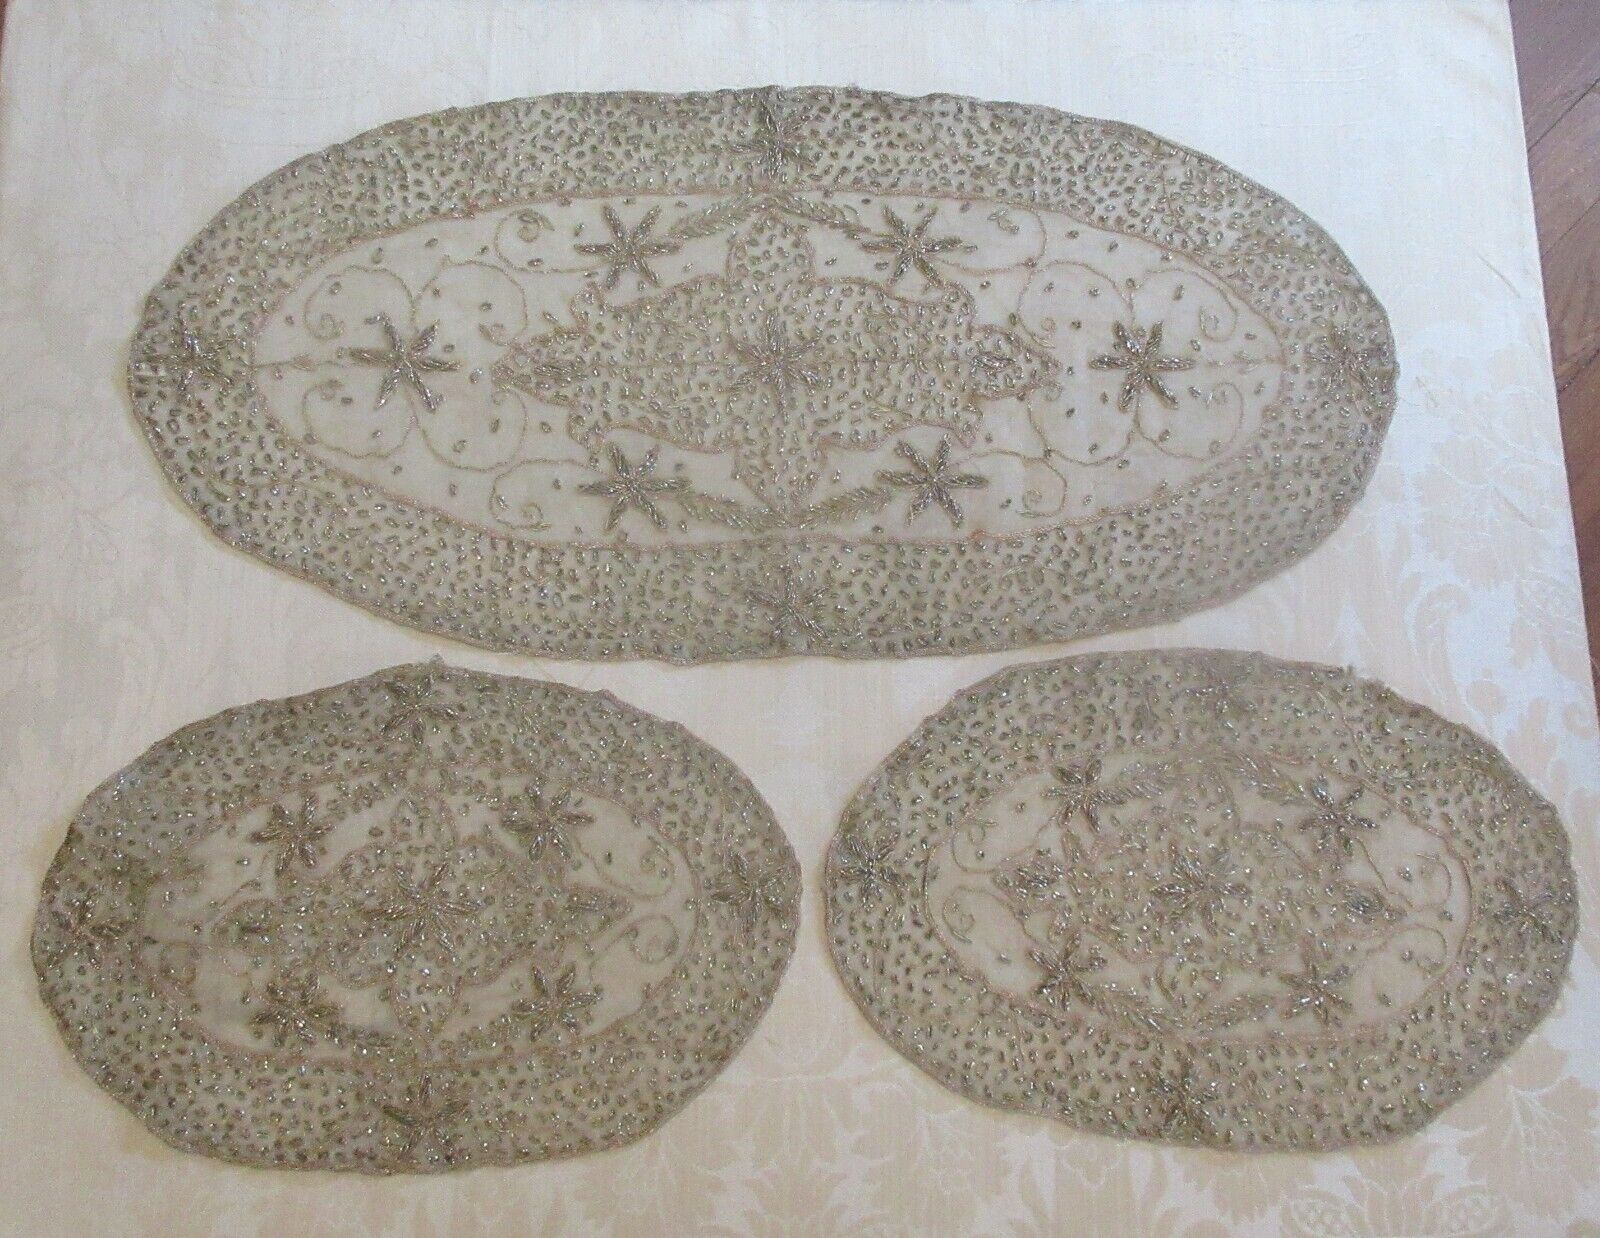 Vintage Glittery Silver Copper Metallic Embroidered Organdy Runner Doily Lot 3pc